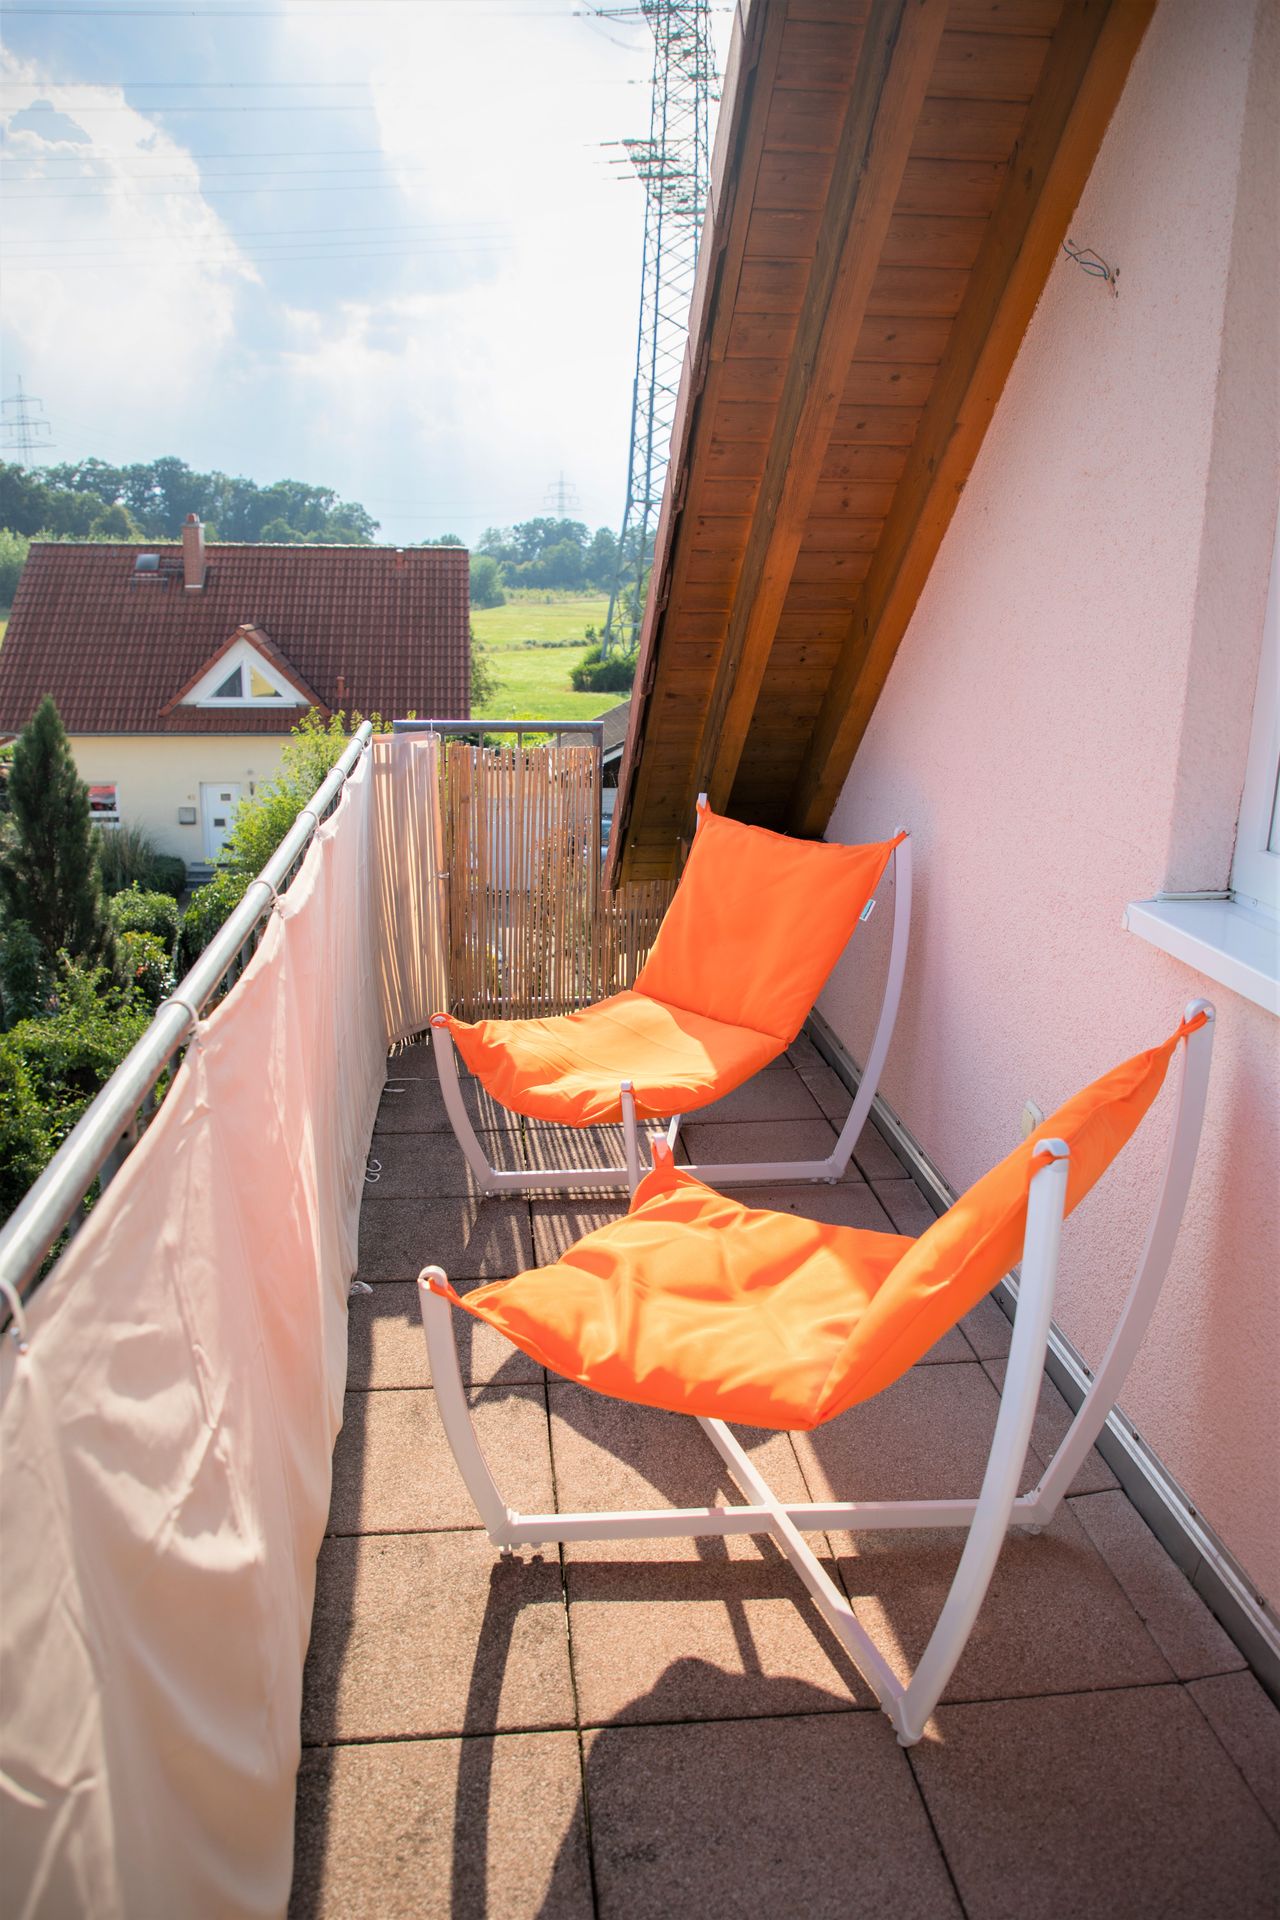 Stylishly furnished, quiet 3 room attic apartment with balcony (95qm) in Bad Vilbel